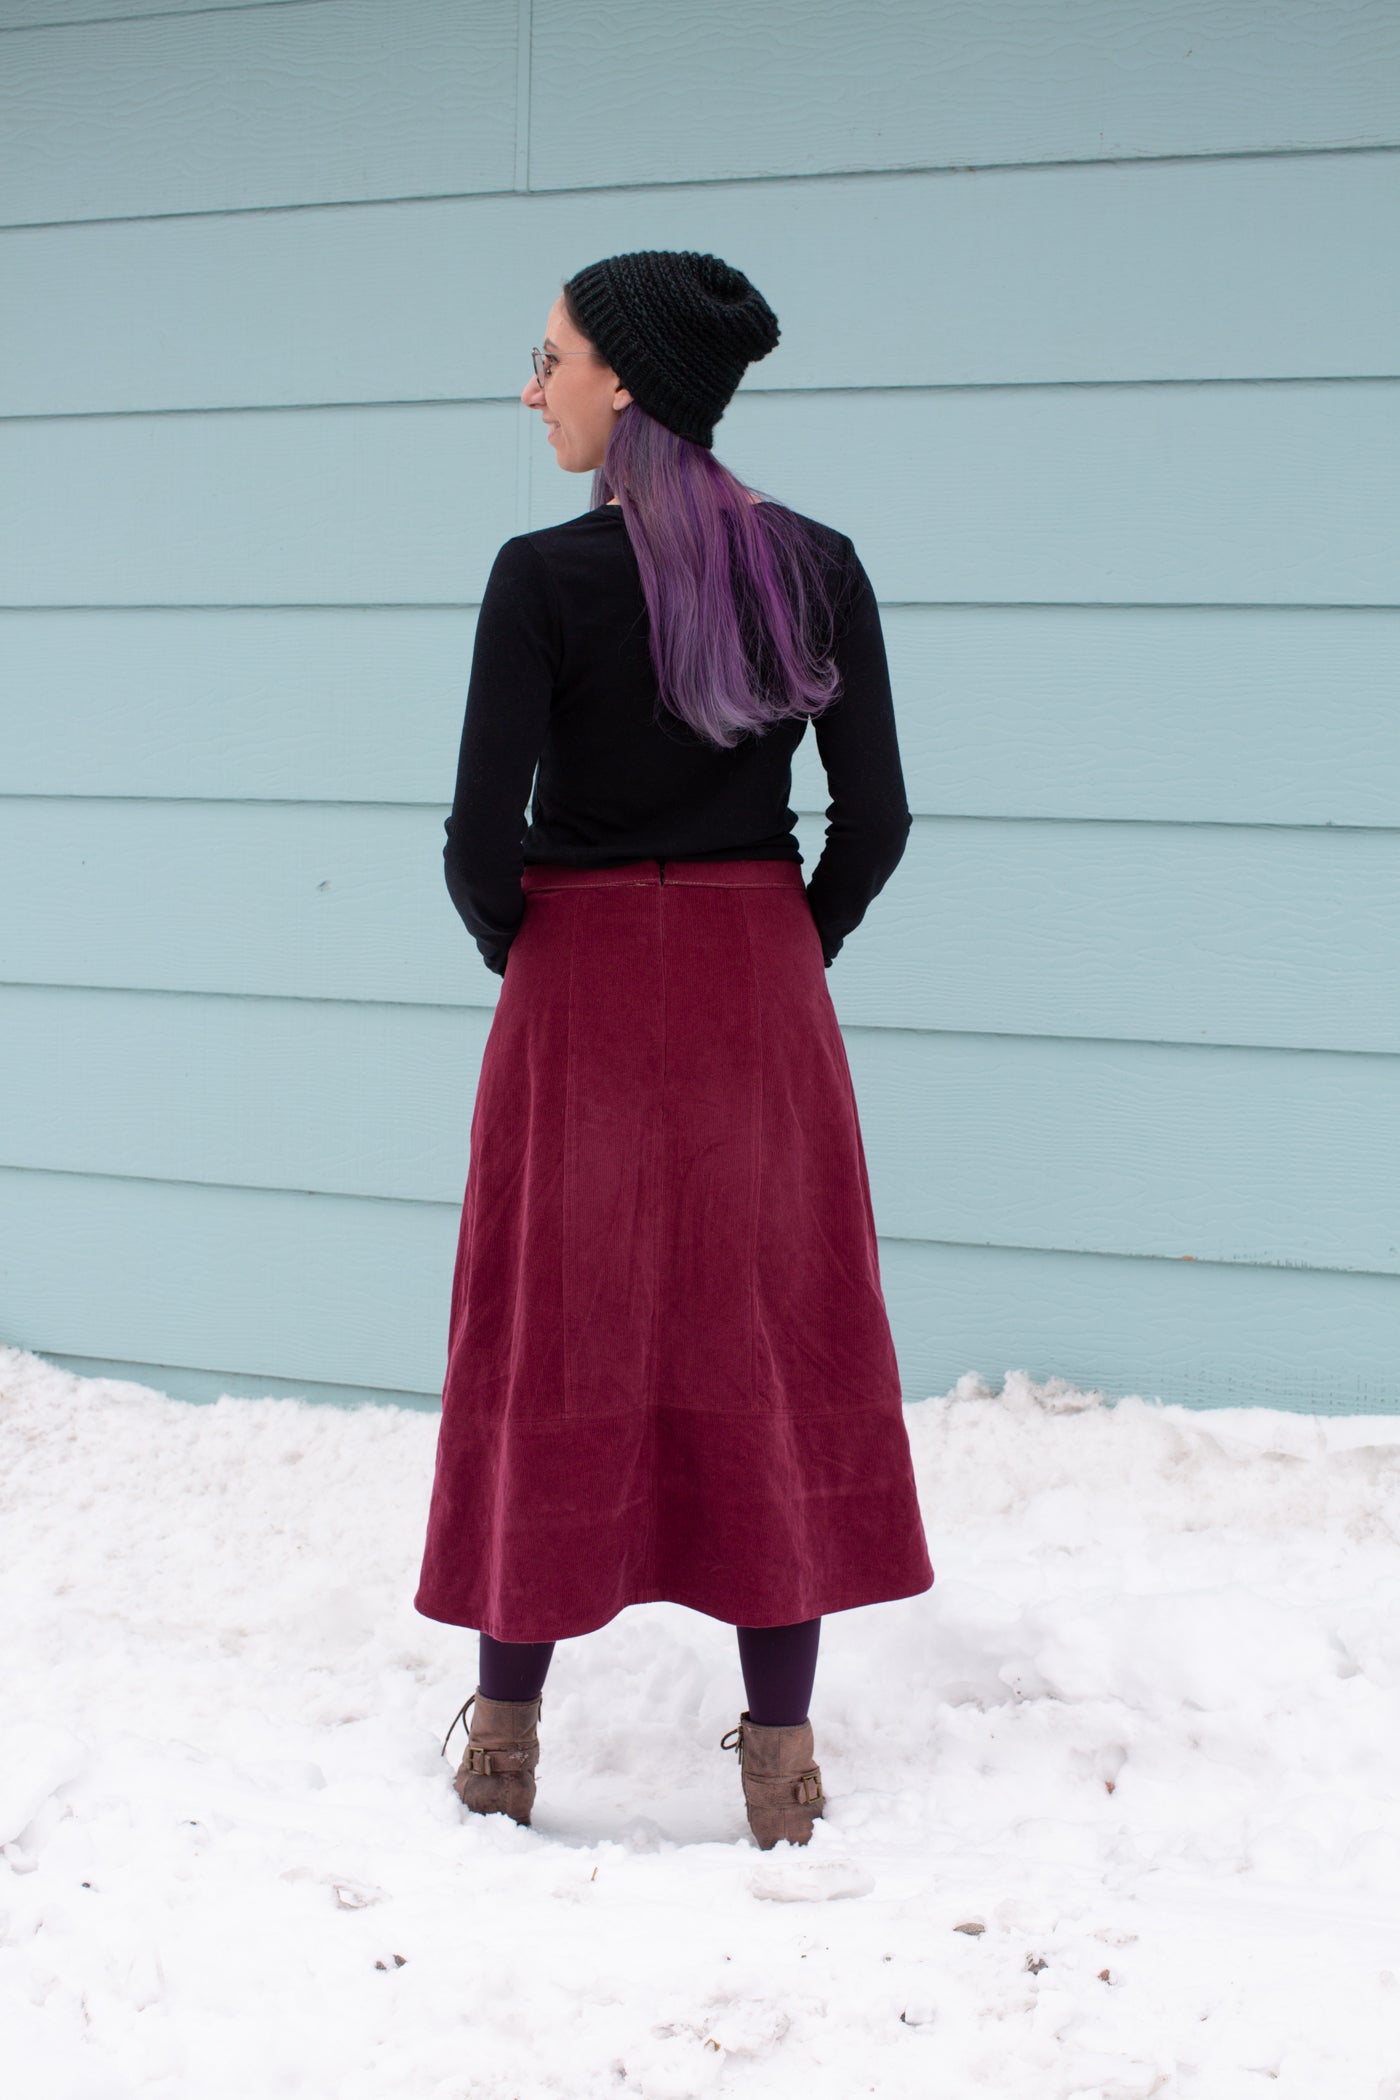 Aly is wearing a Robert Kaufman Corduroy skirt in merlot with a black long sleeve top.  Aly is standing in snow against a sea blue wall facing away from the camera, showing the back of the pattern.  